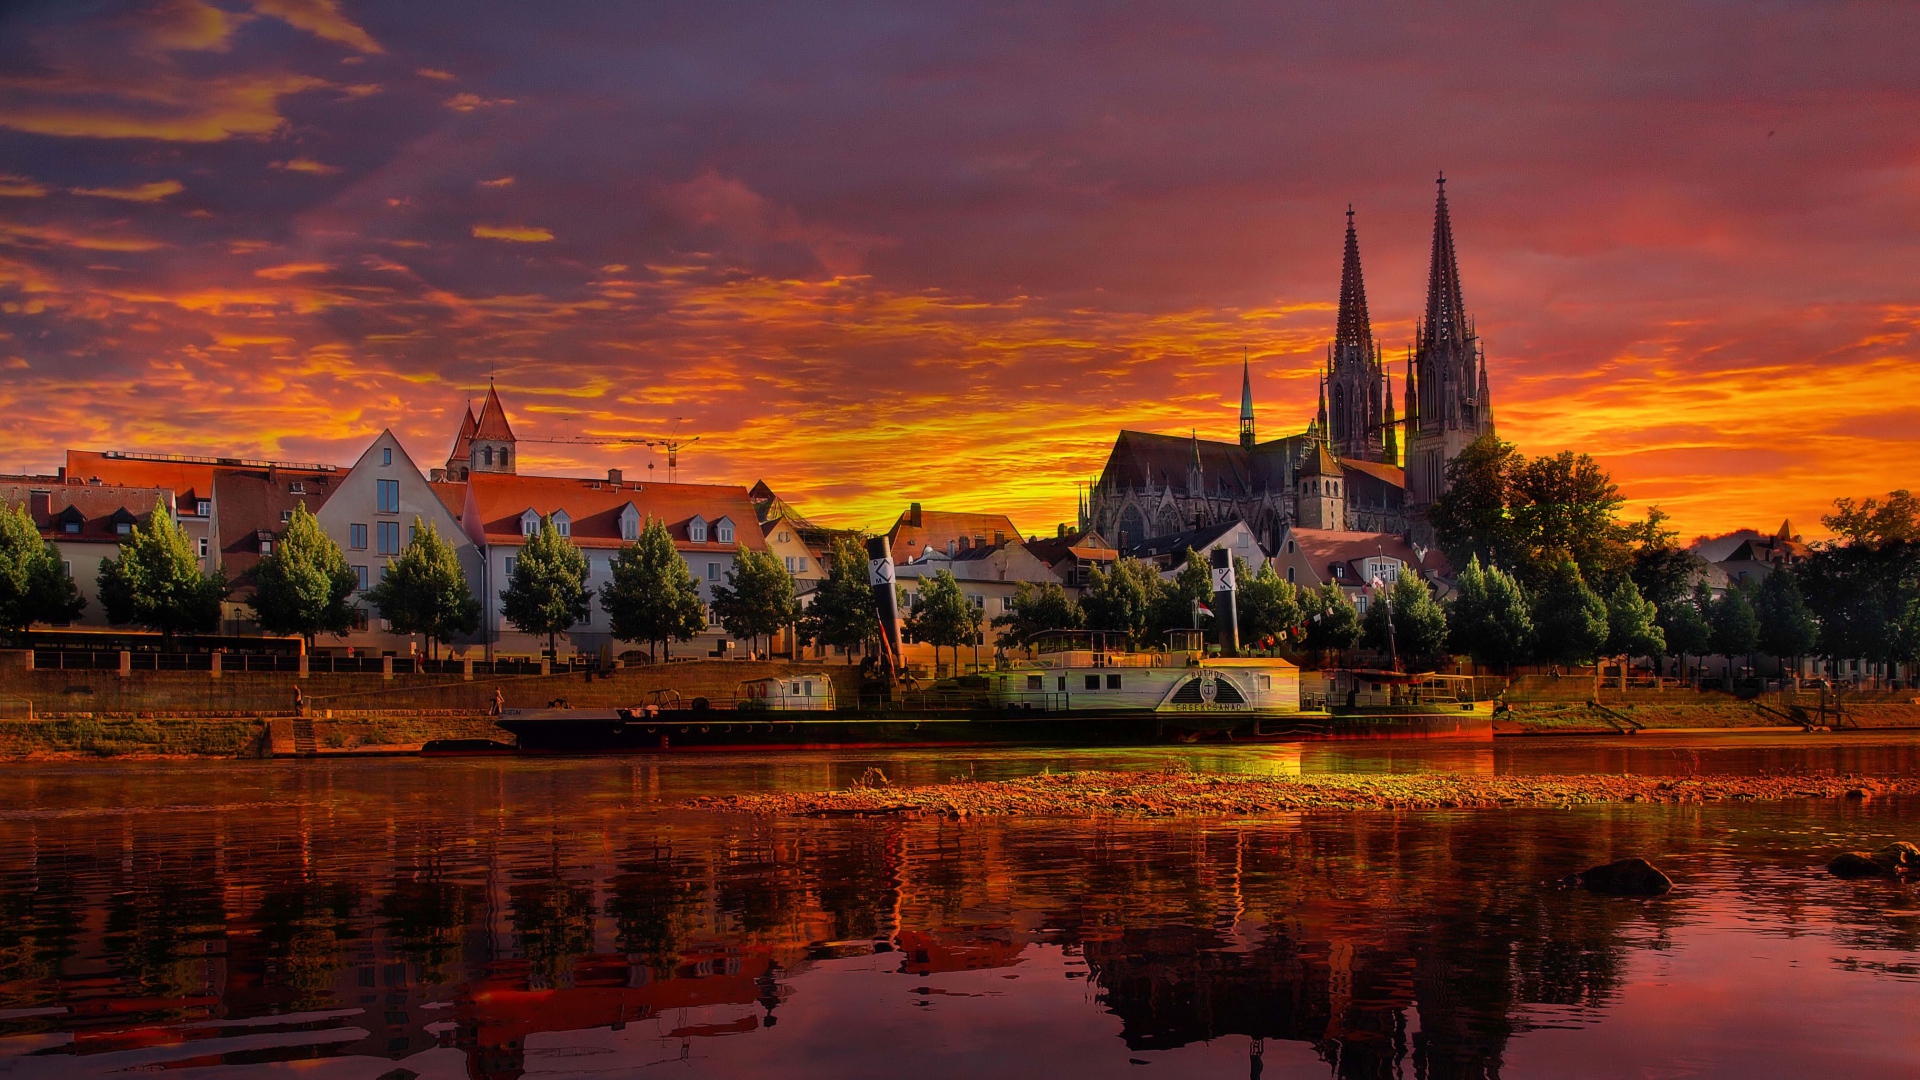 Download 1920x1080 HD Wallpaper regensburg upper palatinate travel attractions gothic cathedral germany sunset, Desktop Background HD